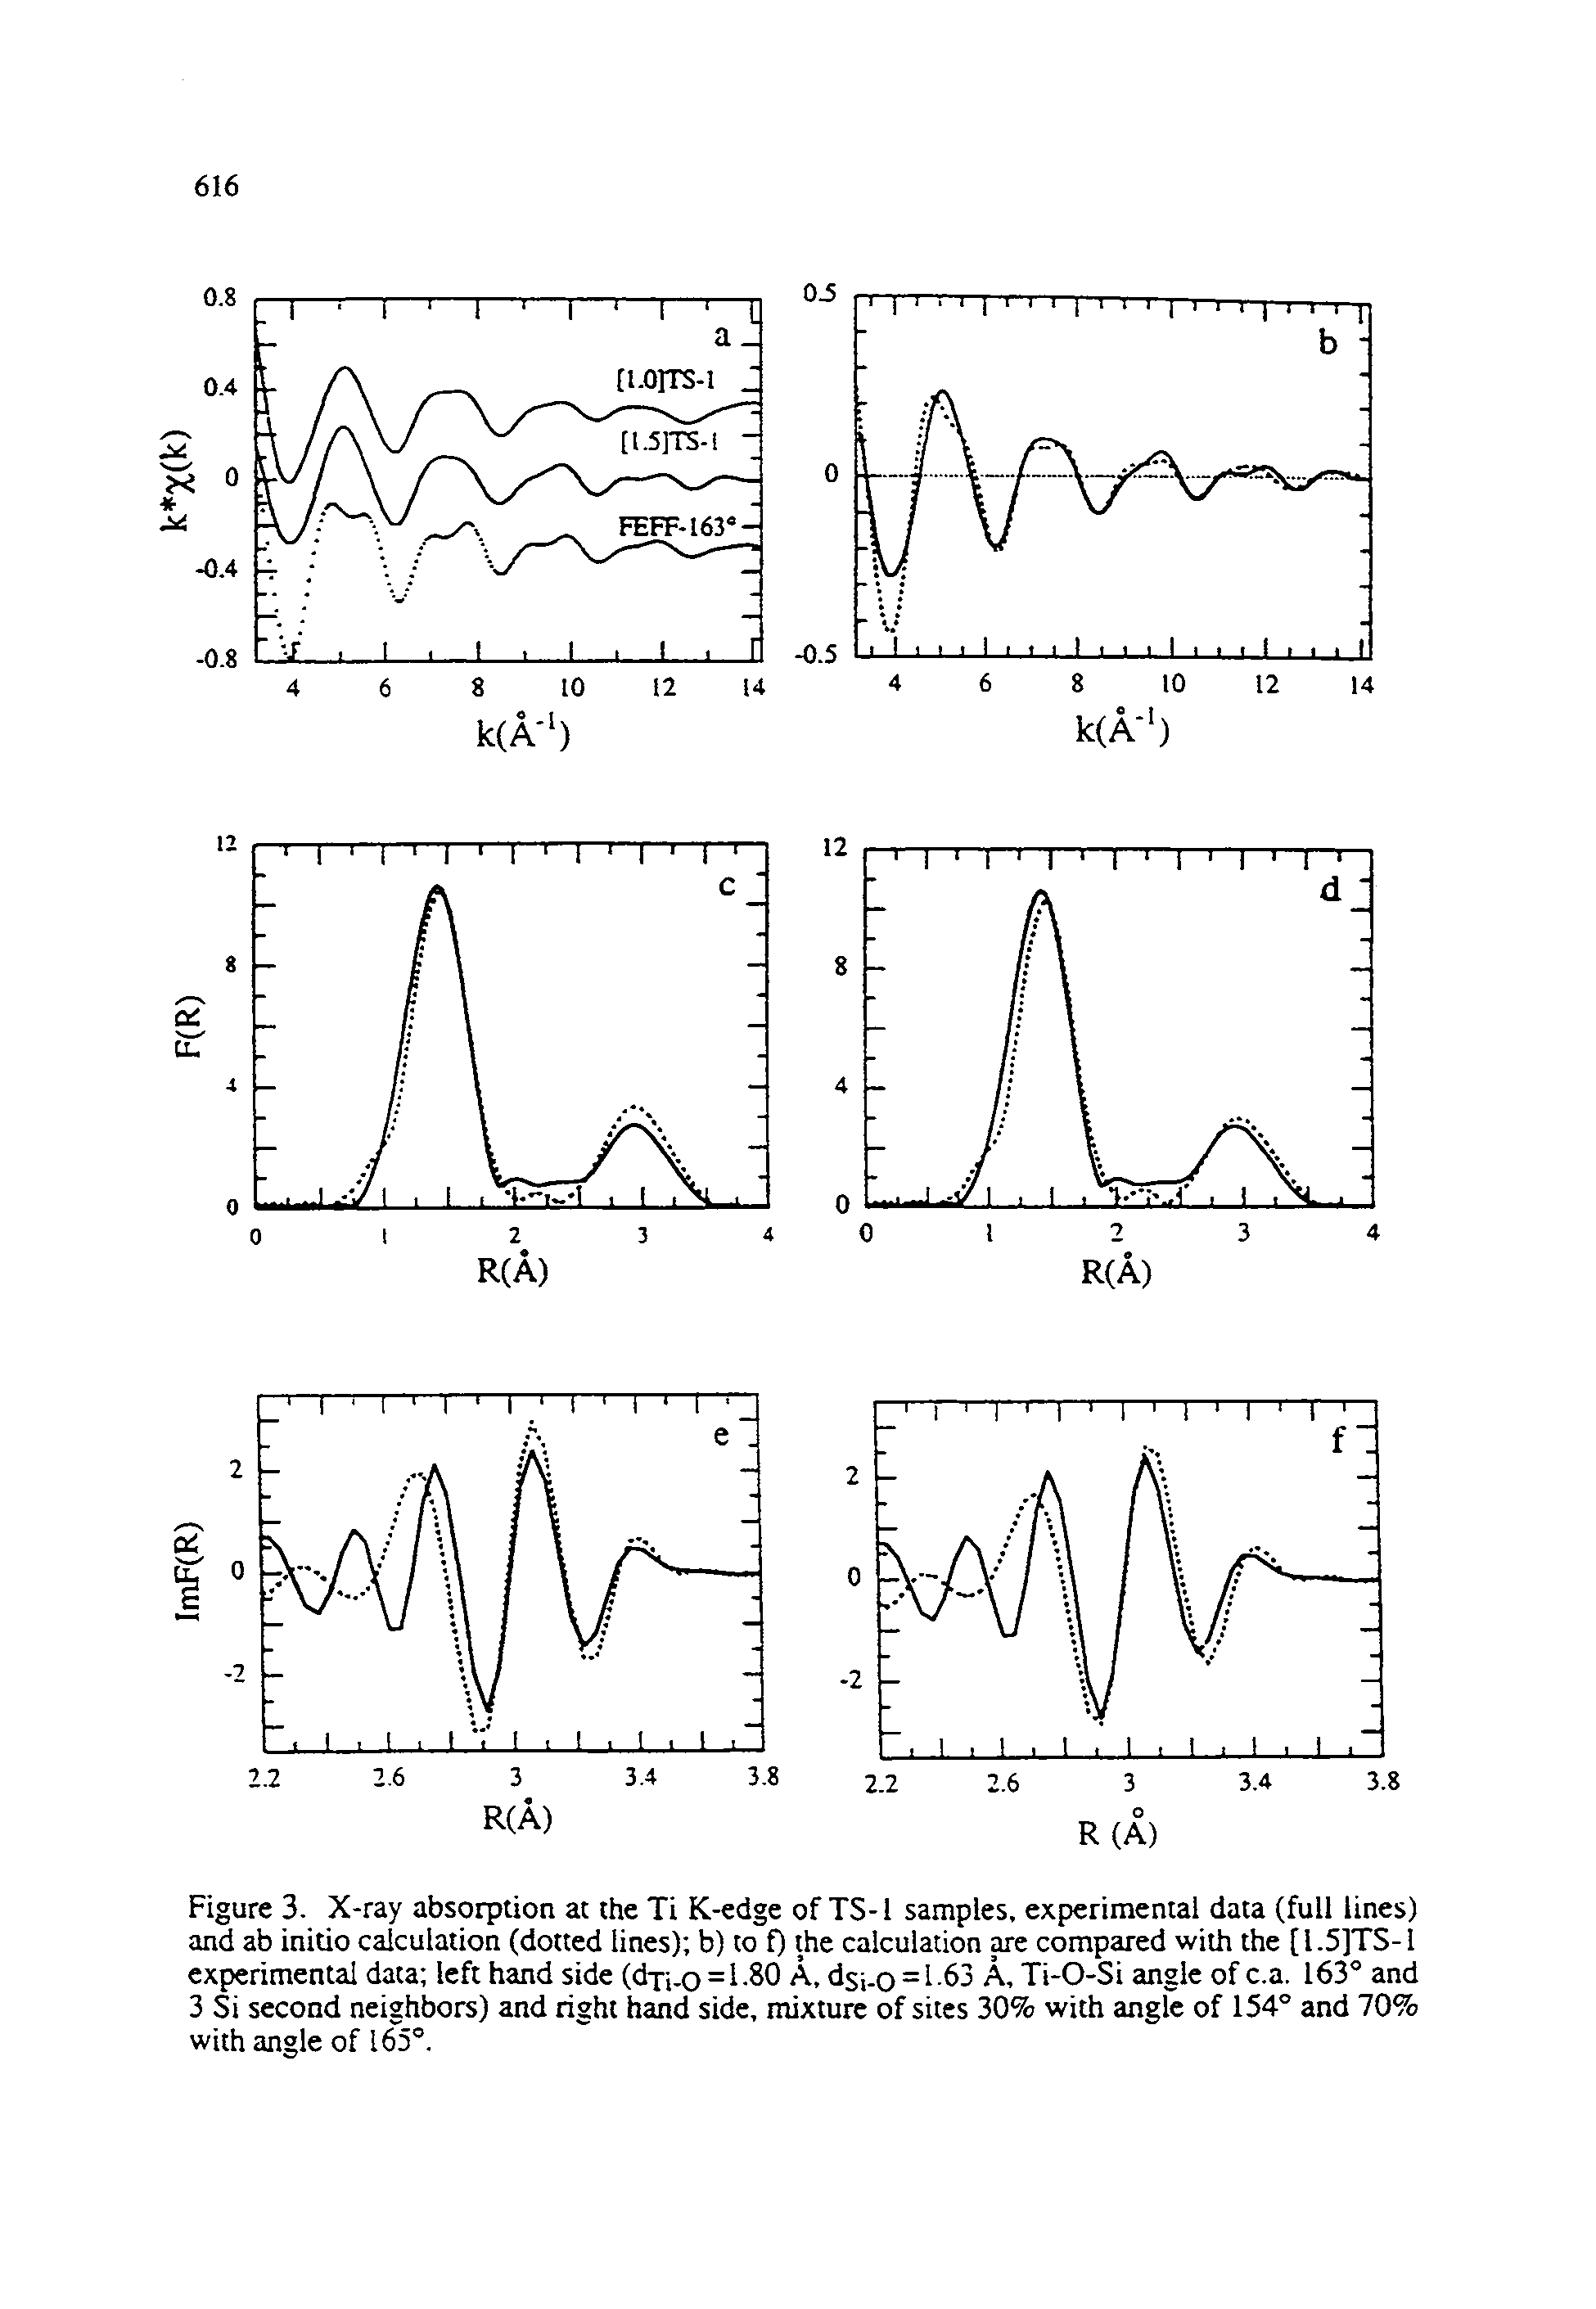 Figure 3. X-ray absorption at the Ti K-edge of TS-1 samples, experimental data (full lines) and ab initio calculation (dotted lines) b) to f) the calculation are compared with the [l.5]TS-l experimental data left hand side (dTi.o = l -80 A, dsi-o = l-63 A, Ti-O-Si angle of c.a. 163° and 3 Si second neighbors) and right htind side, mixture of sites 30% with angle of 154° and 70% with angle of lb s .